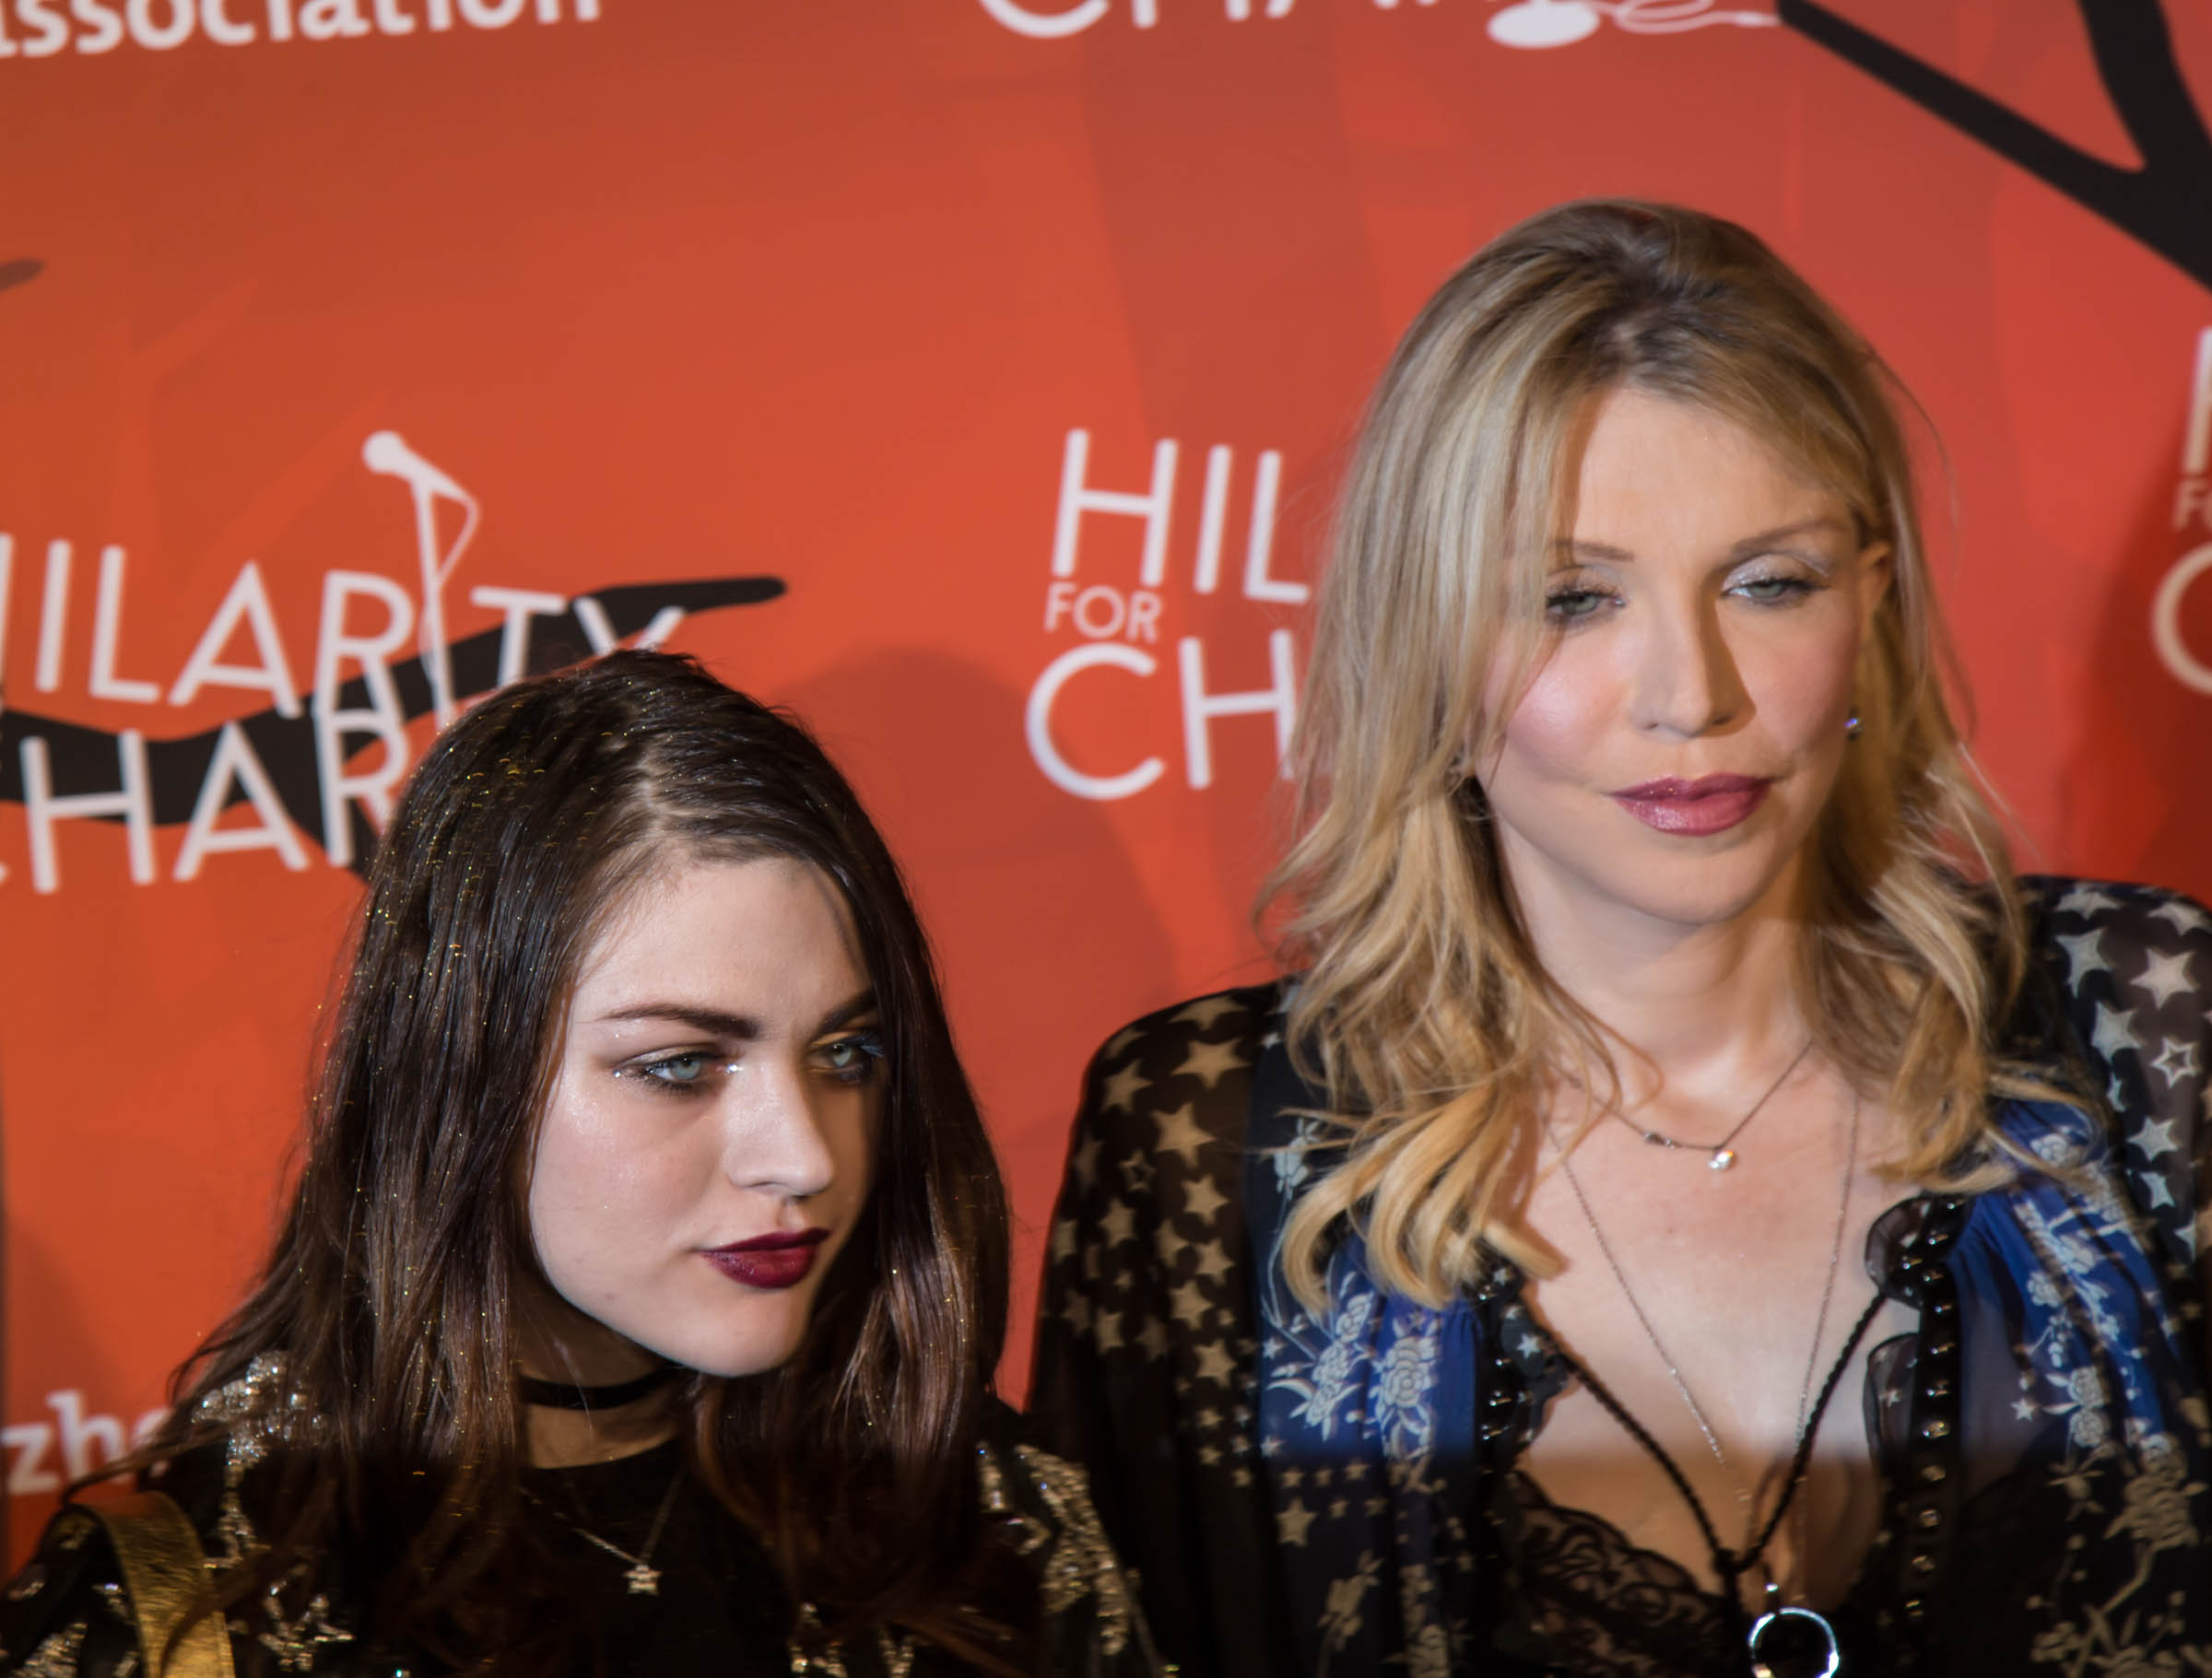 Frances Bean Cobain and Courtney Love attend Hilarity for Charity's 5th Annual Los Angeles Variety Show: Seth Rogen's Halloween at Hollywood Palladium on October 15, 2016 in Los Angeles, California. Photo by Misha Urubkov/The Photo Access